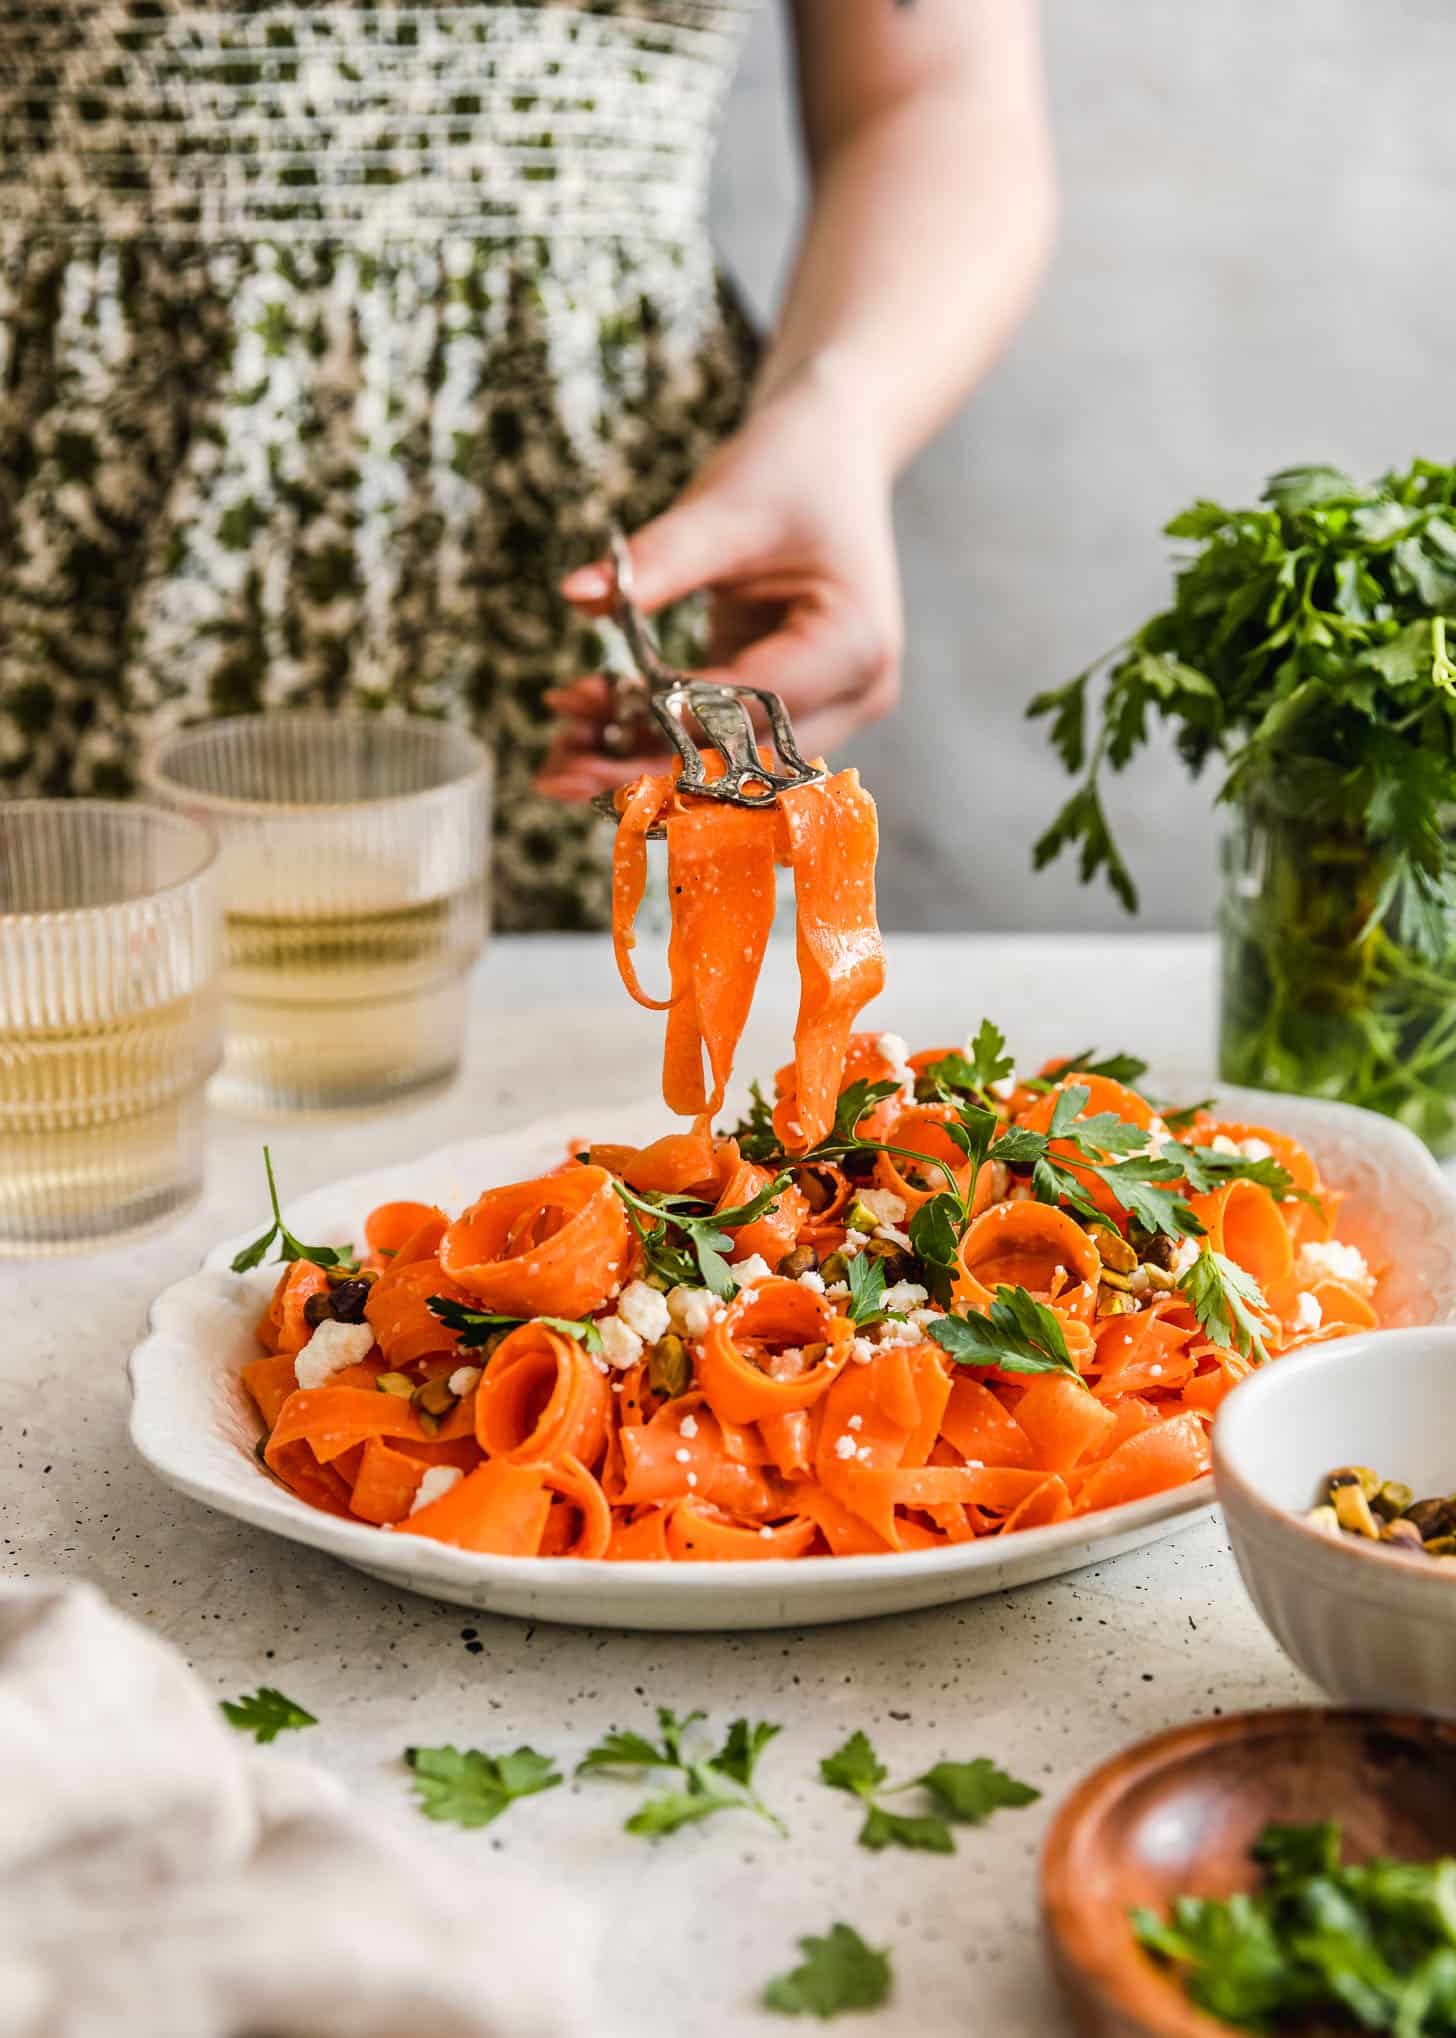 A woman in a green floral dress using tongs to grab raw carrot salad with feta, pistachios, and parsley off of a white platter next to parsley and glasses of white wine with a white and grey background.